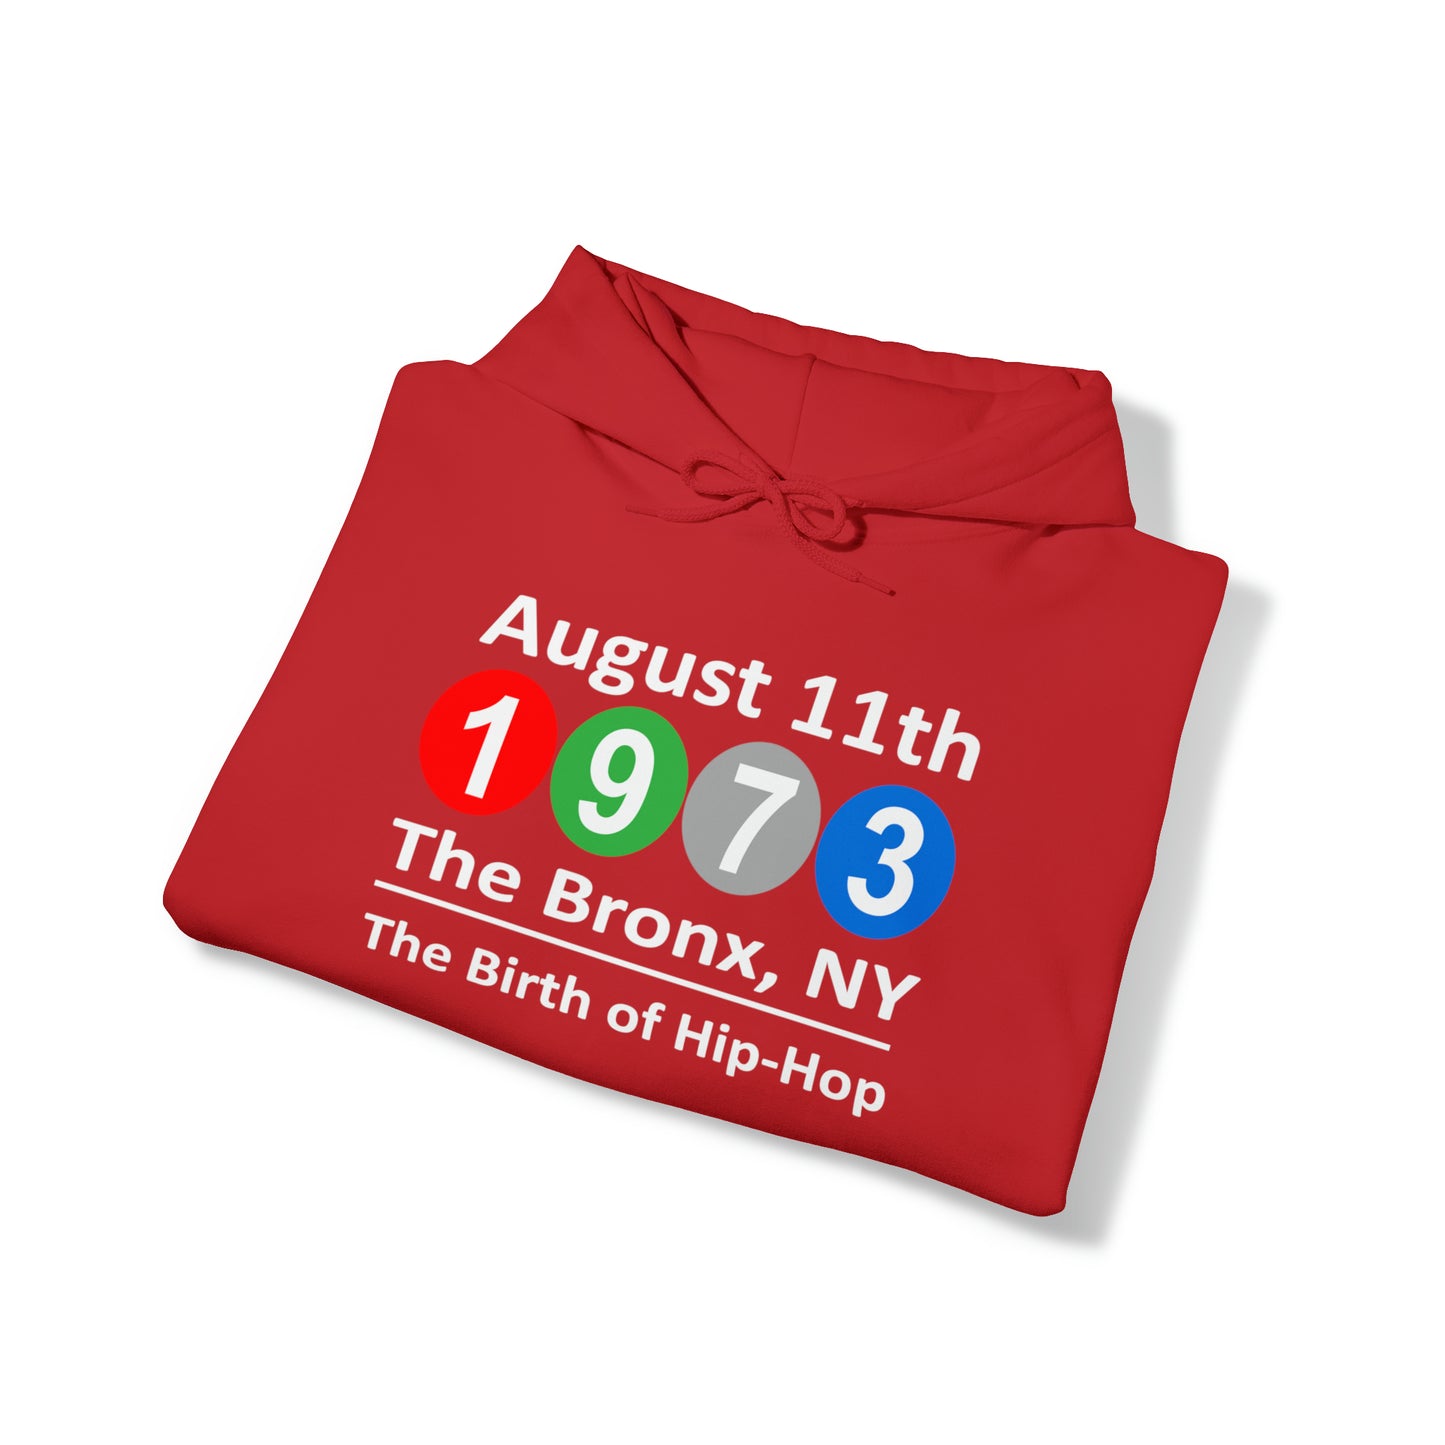 August 11th, 1973 The Bronx, NY The Birth of Hip-Hop Hoodie Sweatshirt Great gift for a Hip-Hop & Rap Lover, Rap Hoodie, Rap Gift